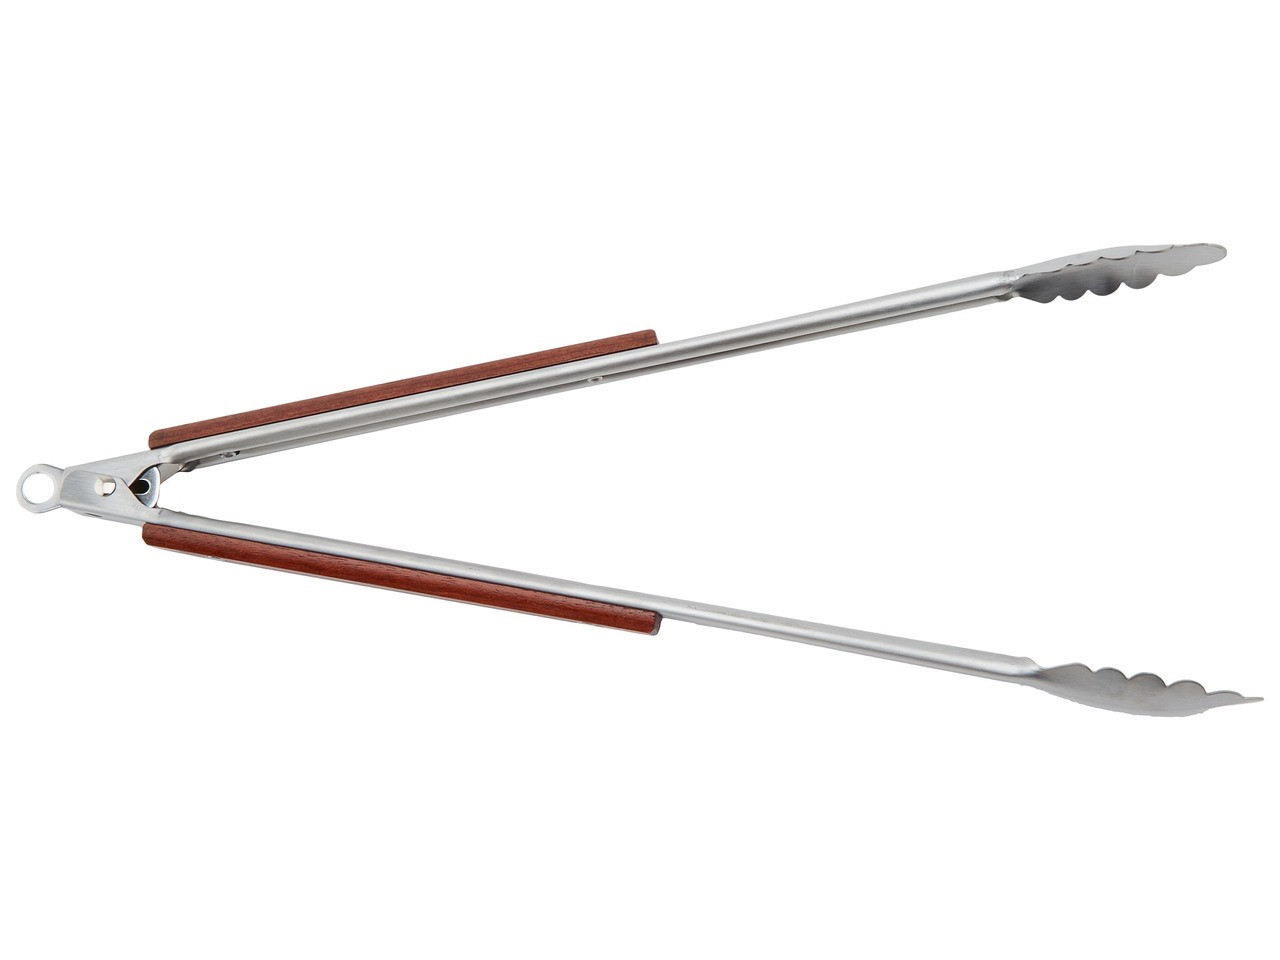 RSVP BBQ 18 Inch Locking Tongs - Cookware & More